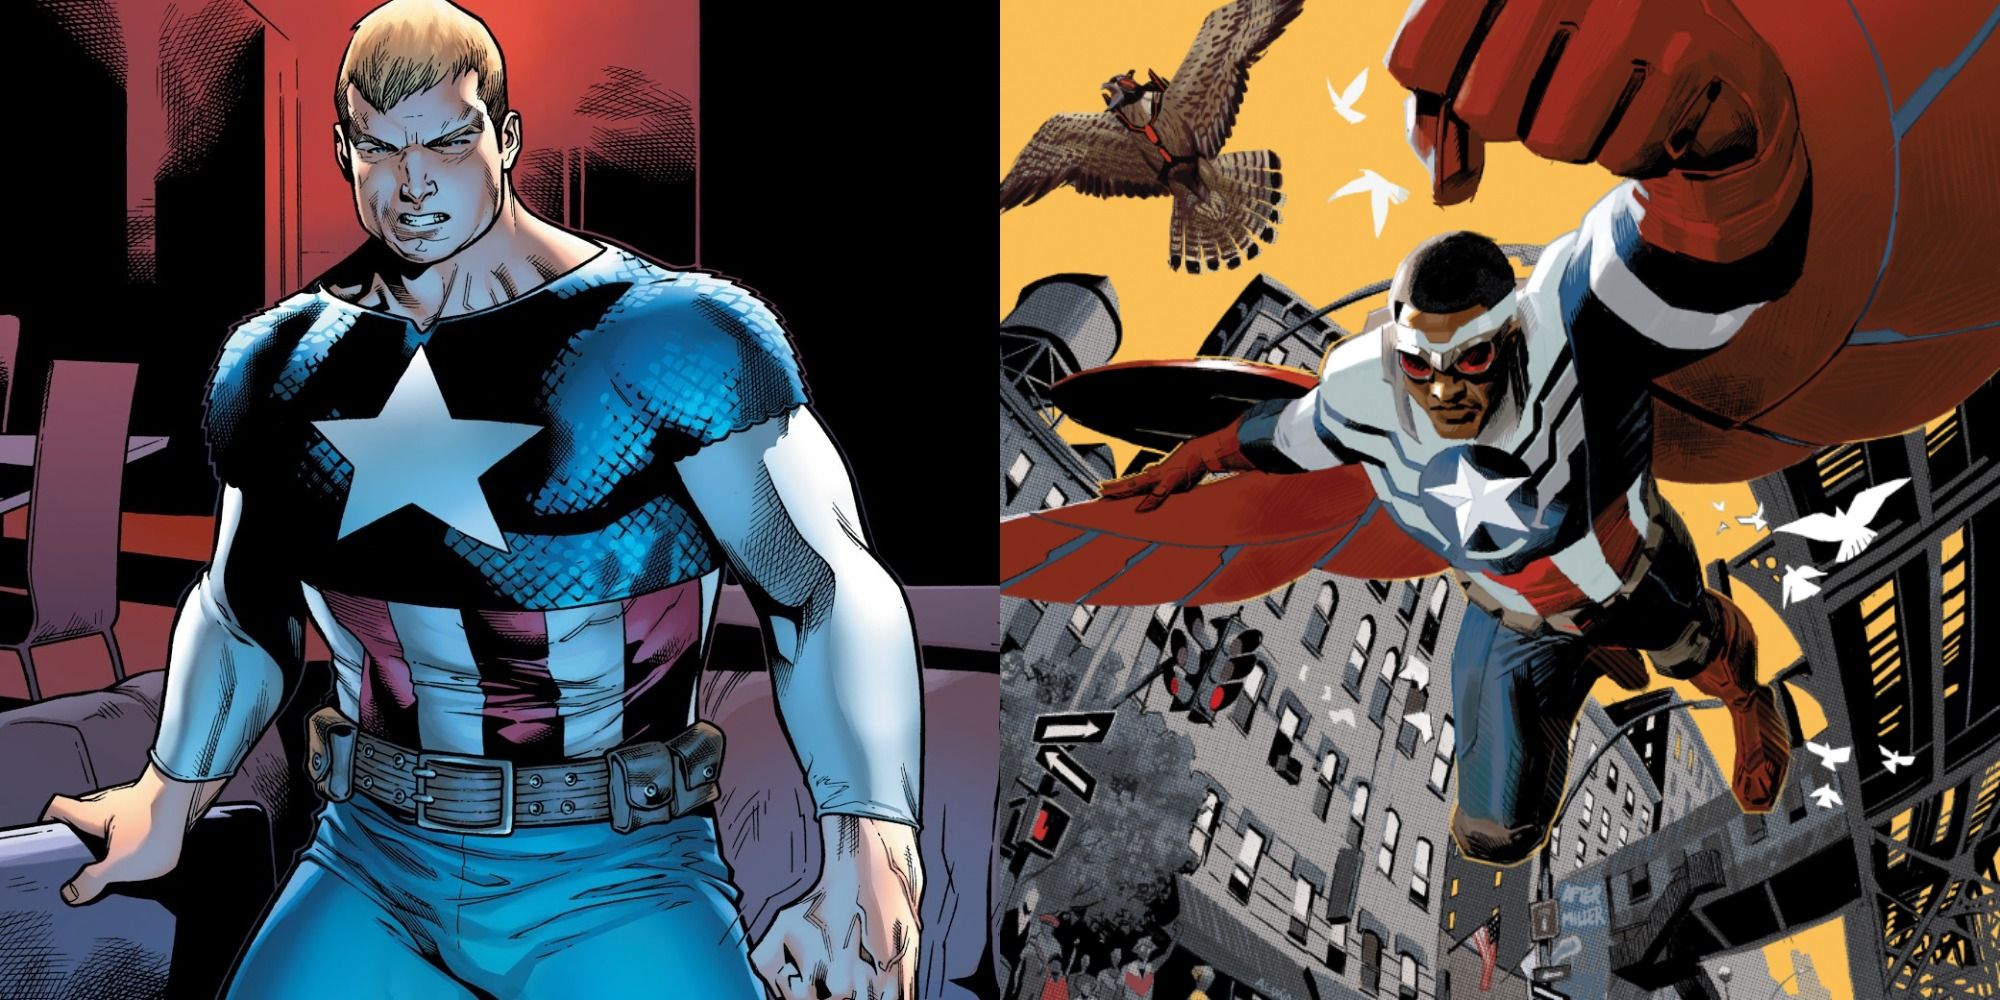 side by side image of Steve Rogers and Sam Wilson as the Marvel superhero Captain America